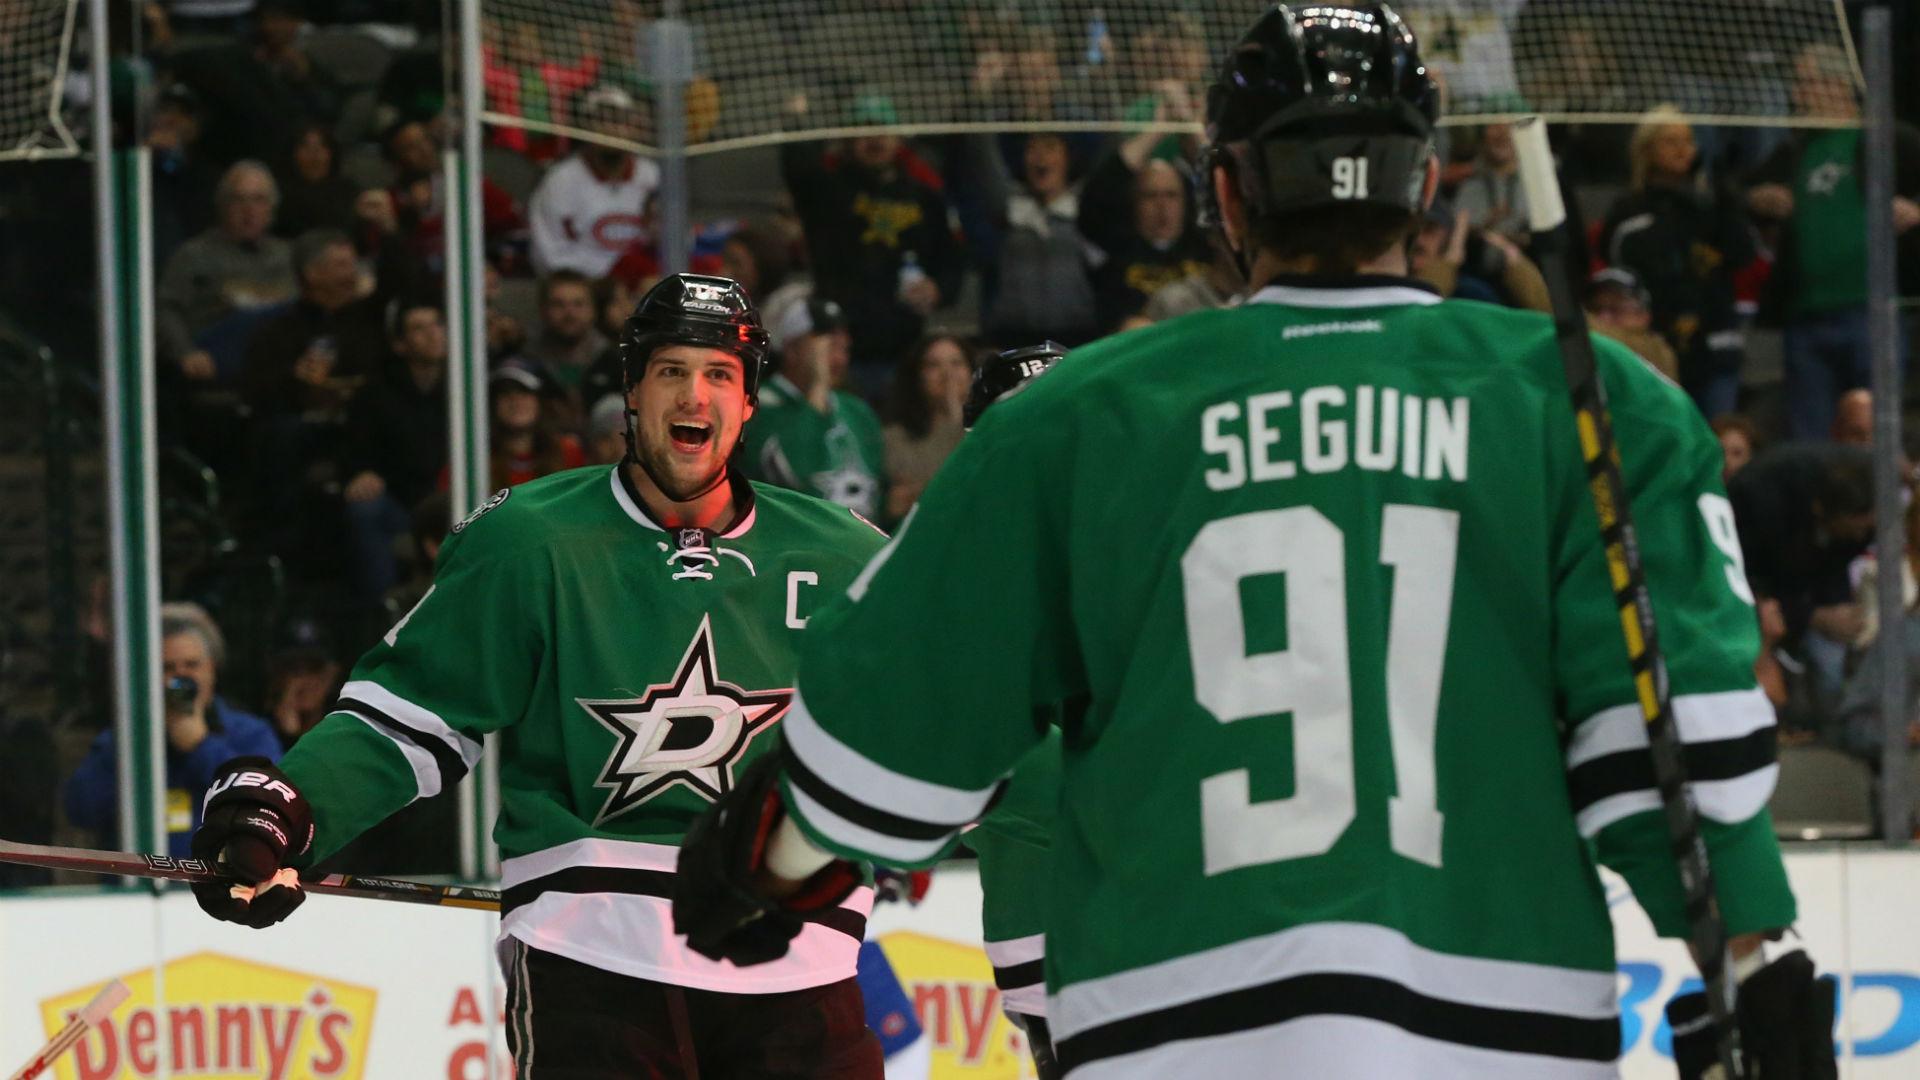 Jamie Benn apologized to Sedins for stupid comment, Stars say. NHL